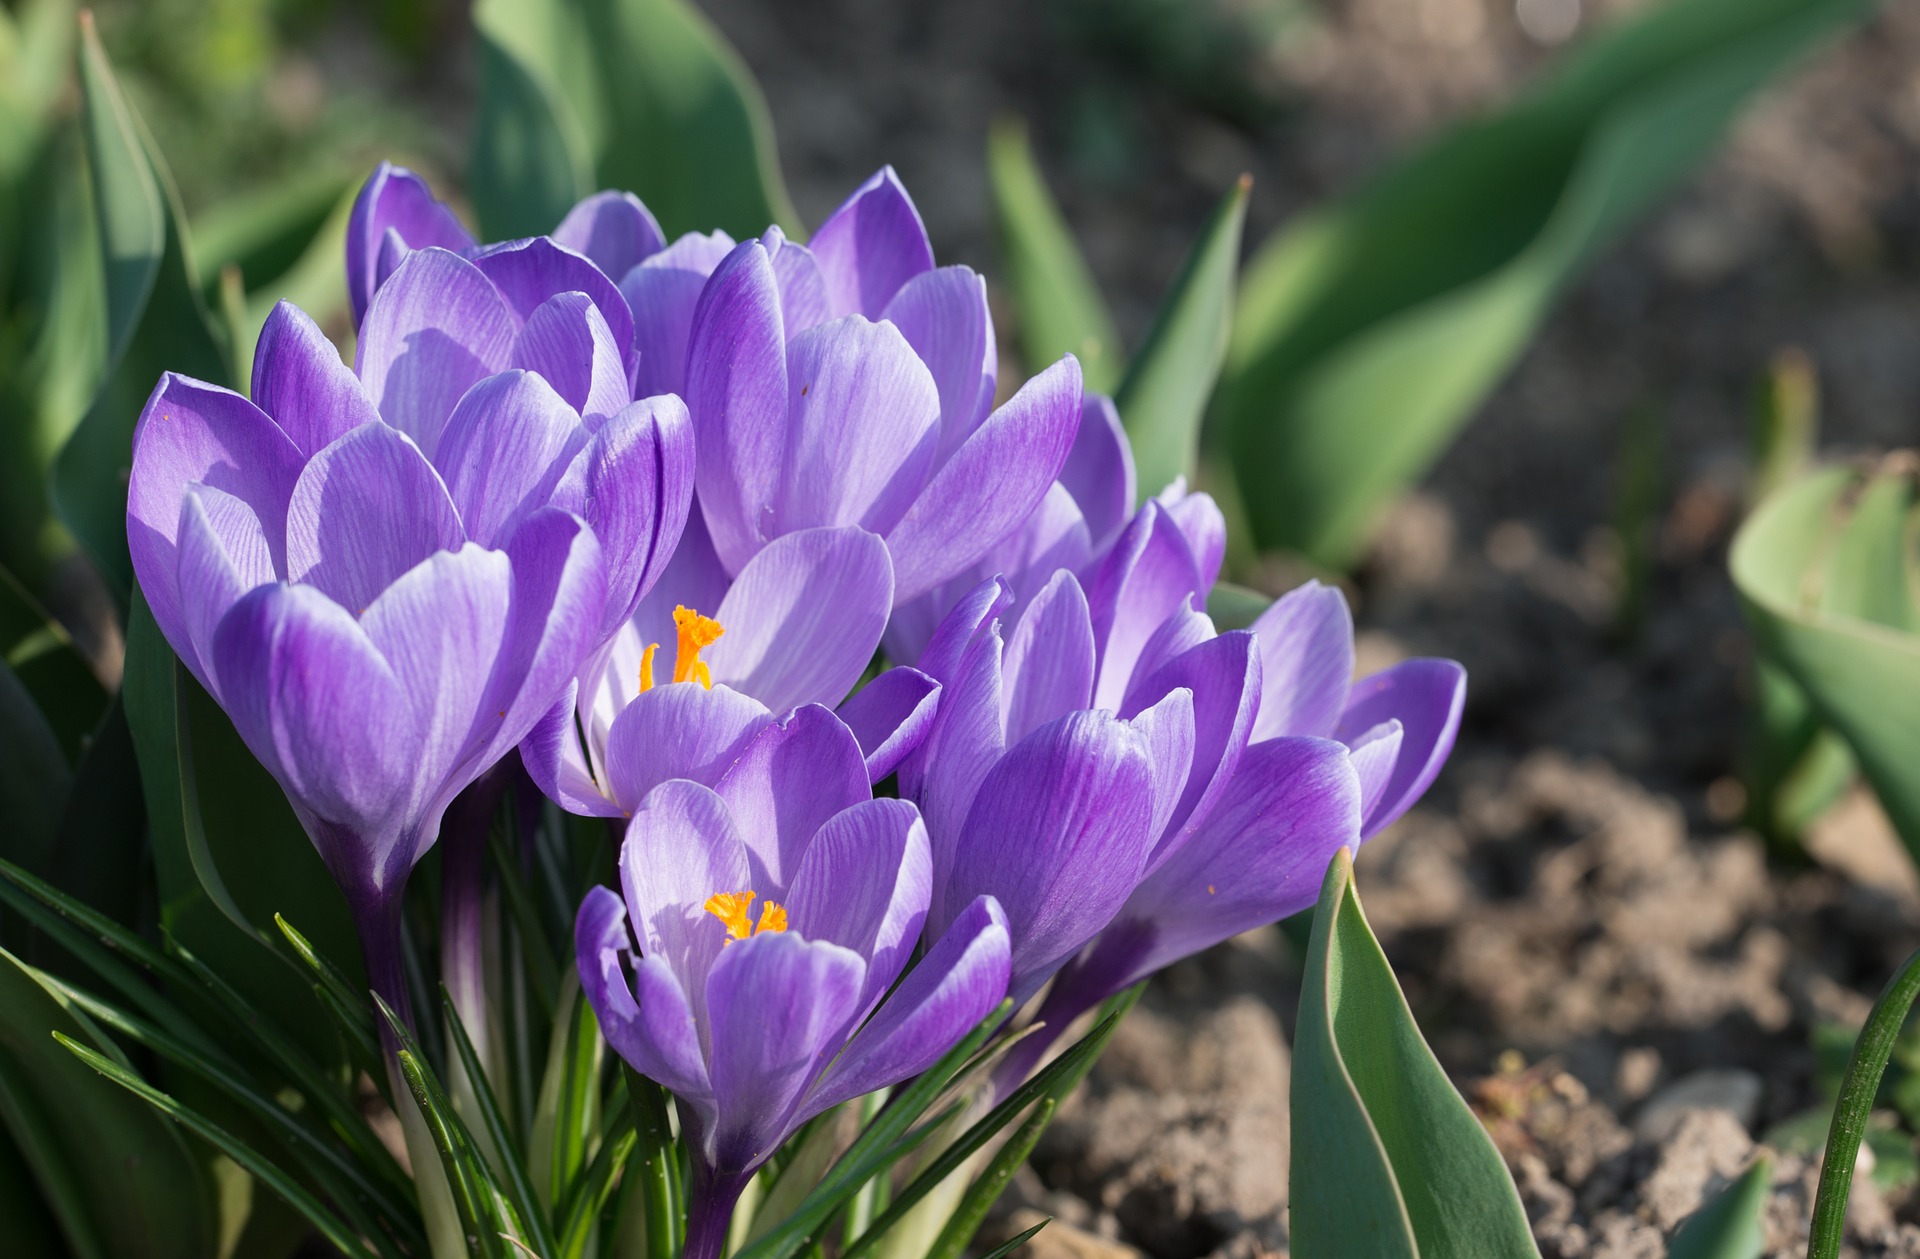 Crocuses: How to Plant, Grow, and Care for Crocus Flowers | The Old ...